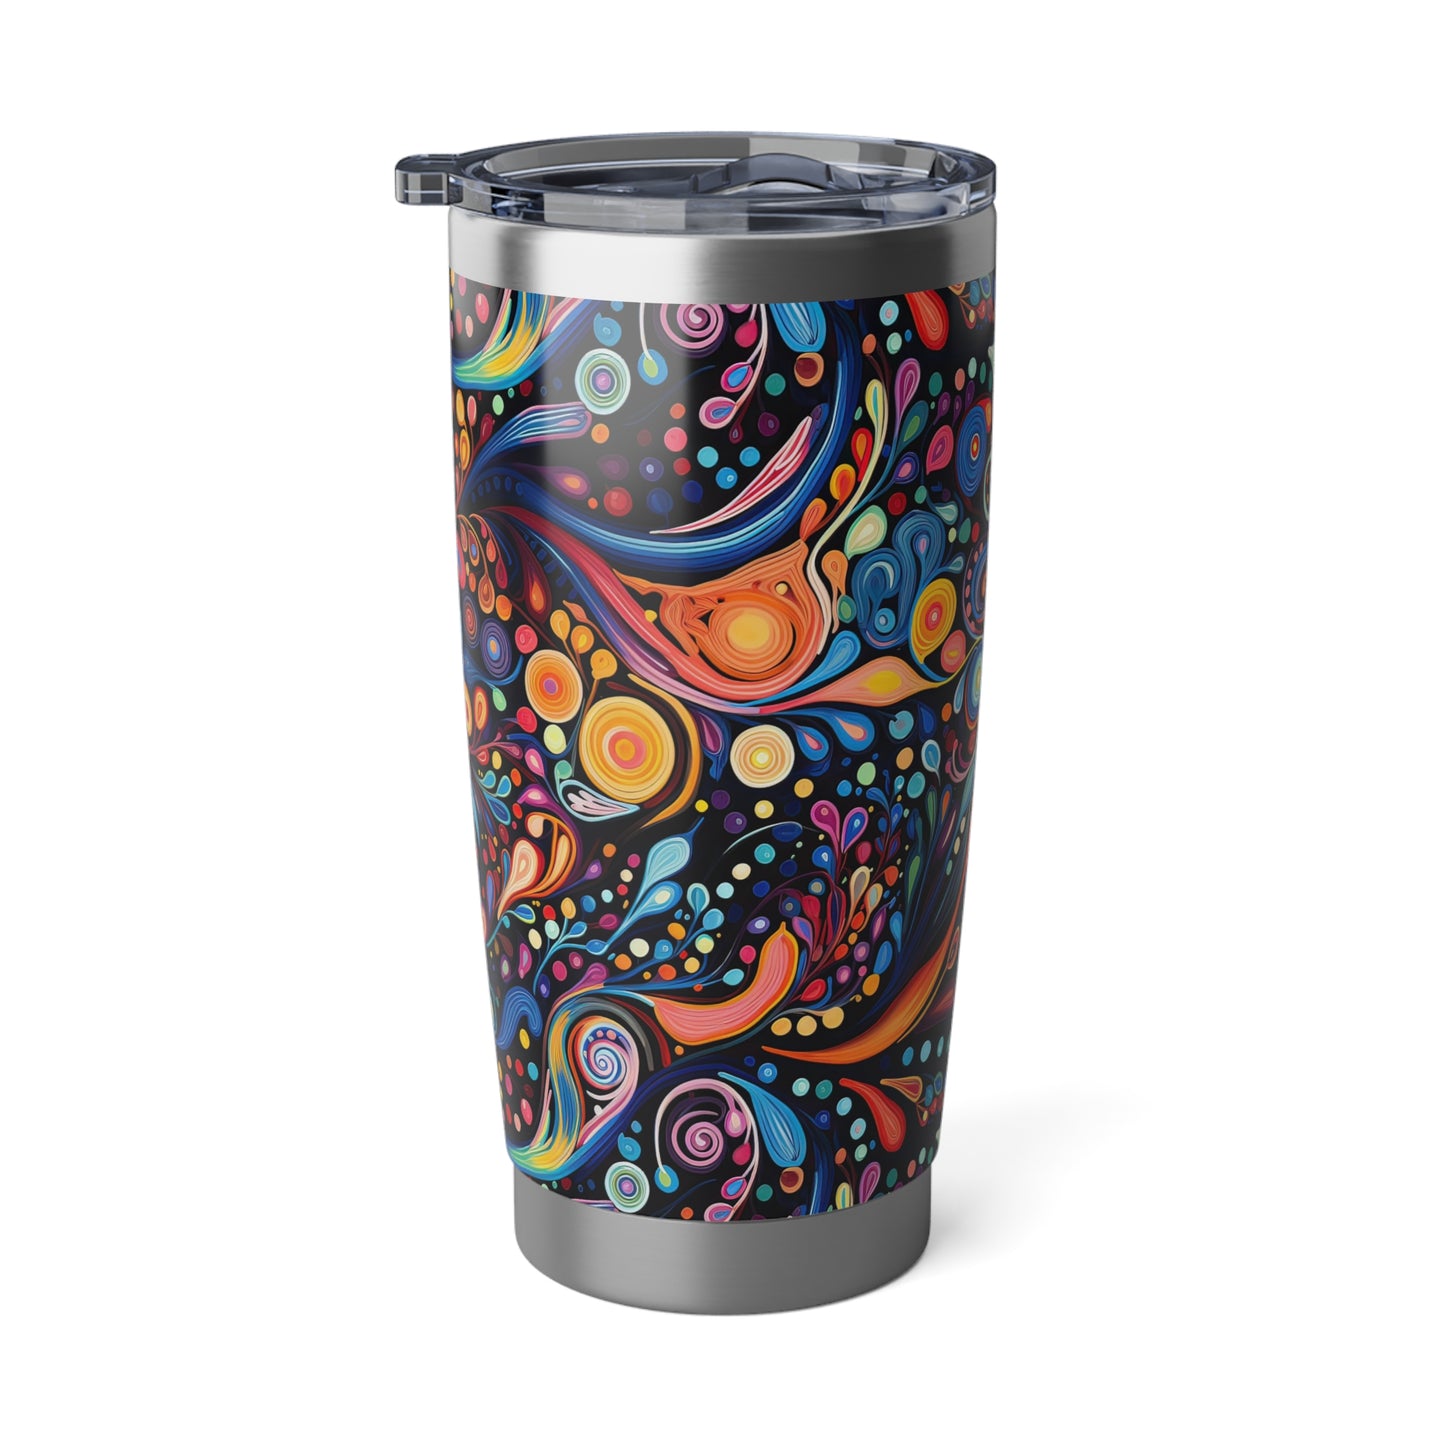 Colorful Psychedelic Swirls 1.10 - Vagabond 20oz Tumbler - Stainless Steel - Double Wall